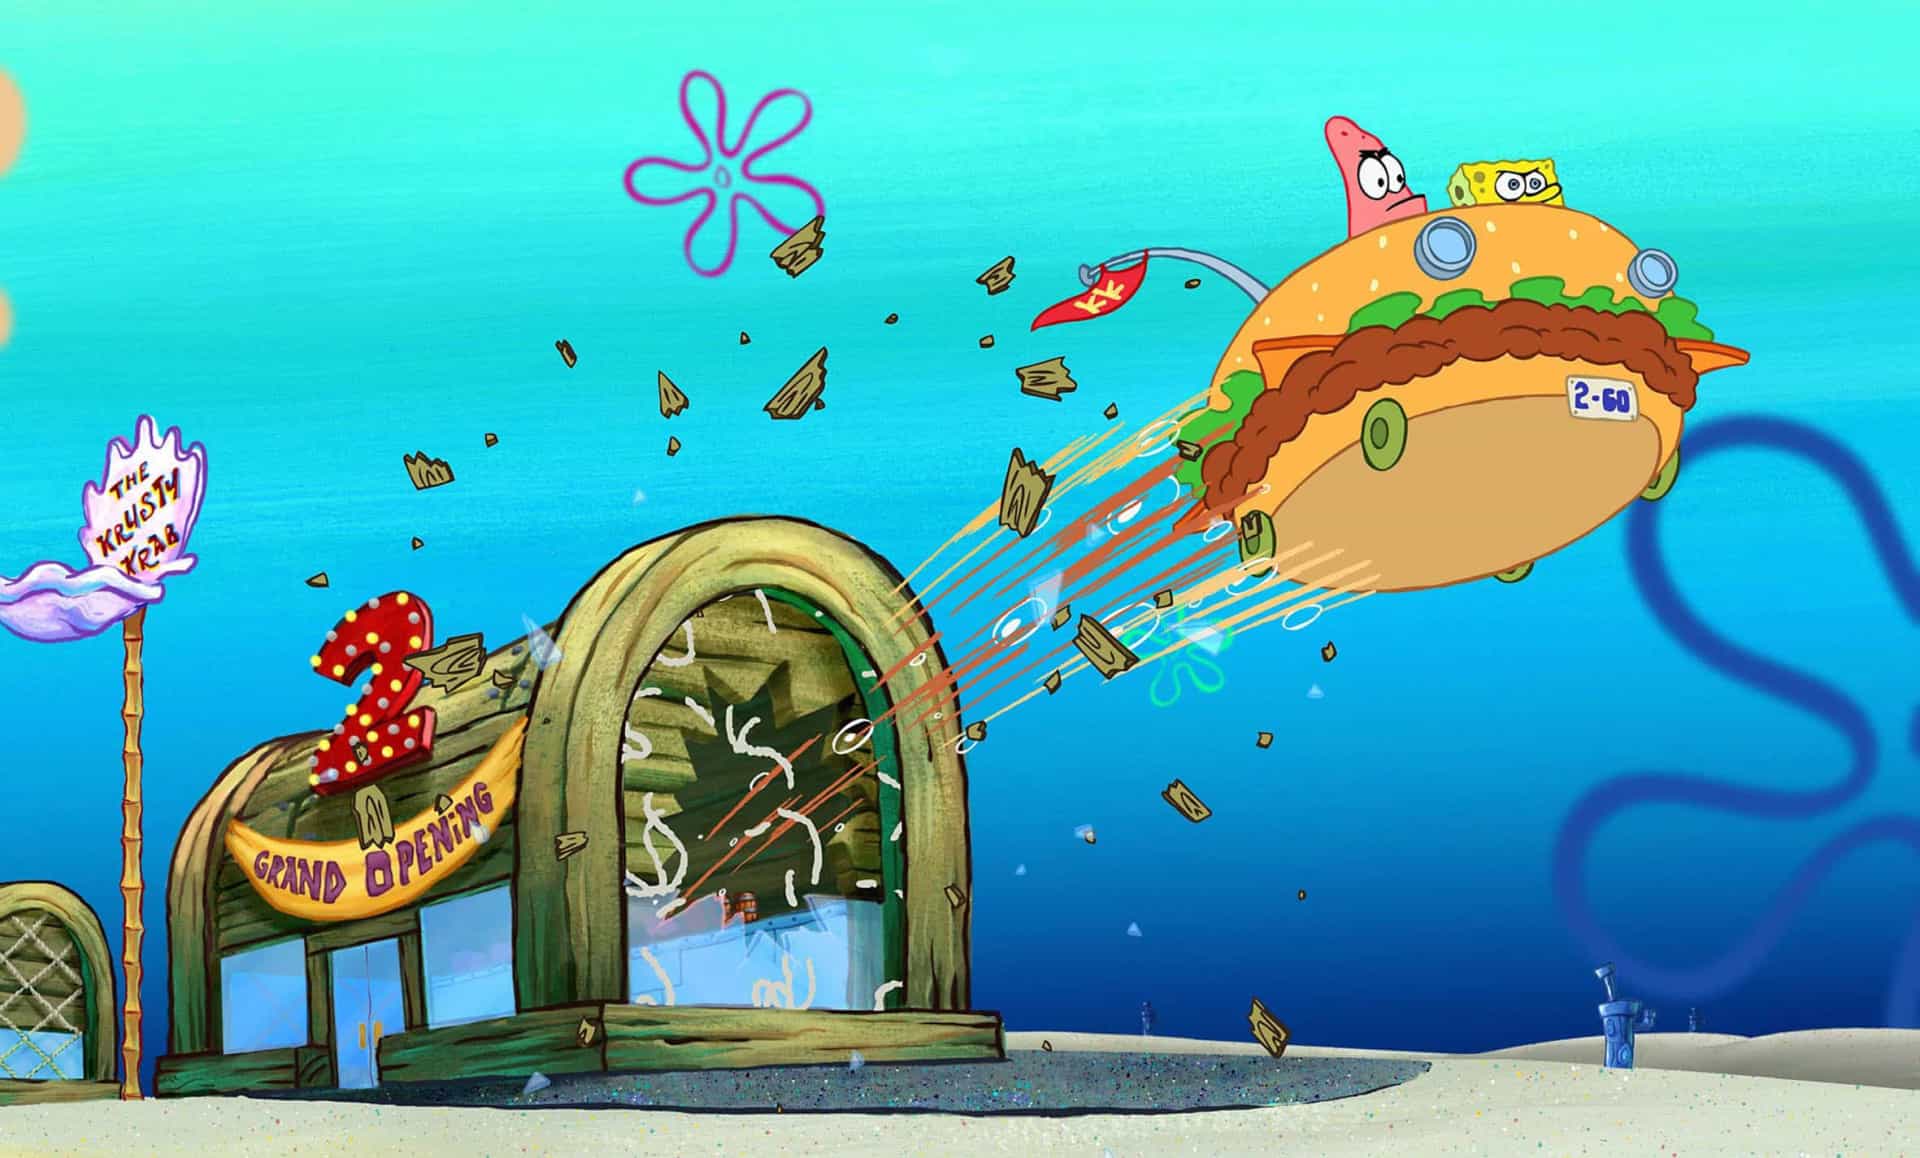 <p>Located somewhere in the Pacific Ocean, Bikini Bottom has quite an eccentric community with faces like SpongeBob, Patrick, and Squidward.</p>